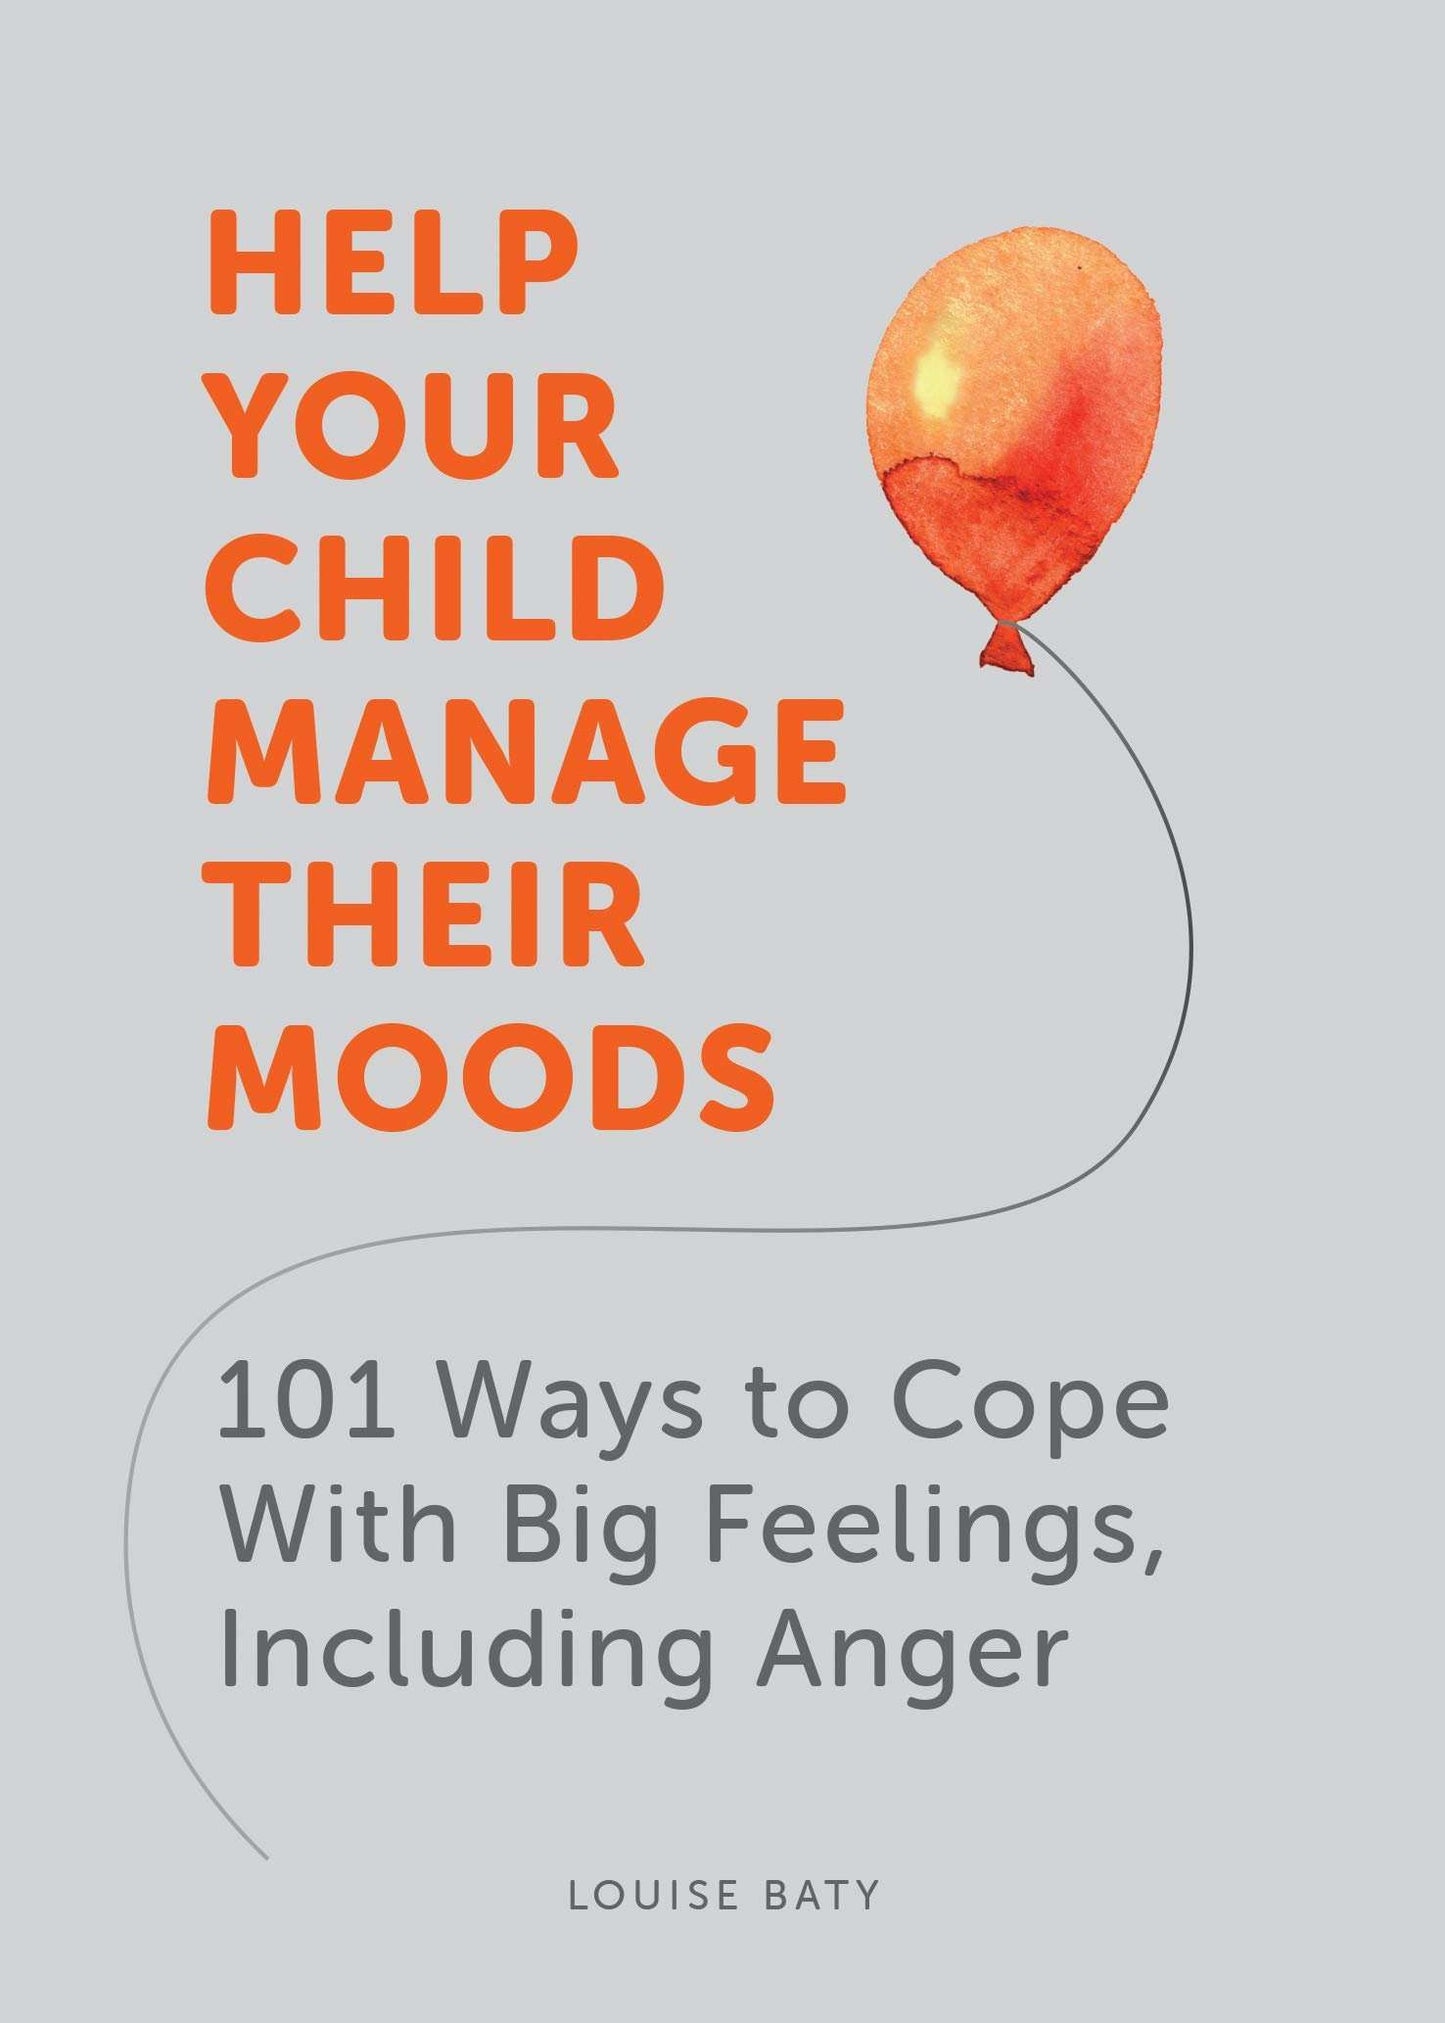 Help Your Child Manage Their Moods: 101 Ways to Cope with Big Feelings